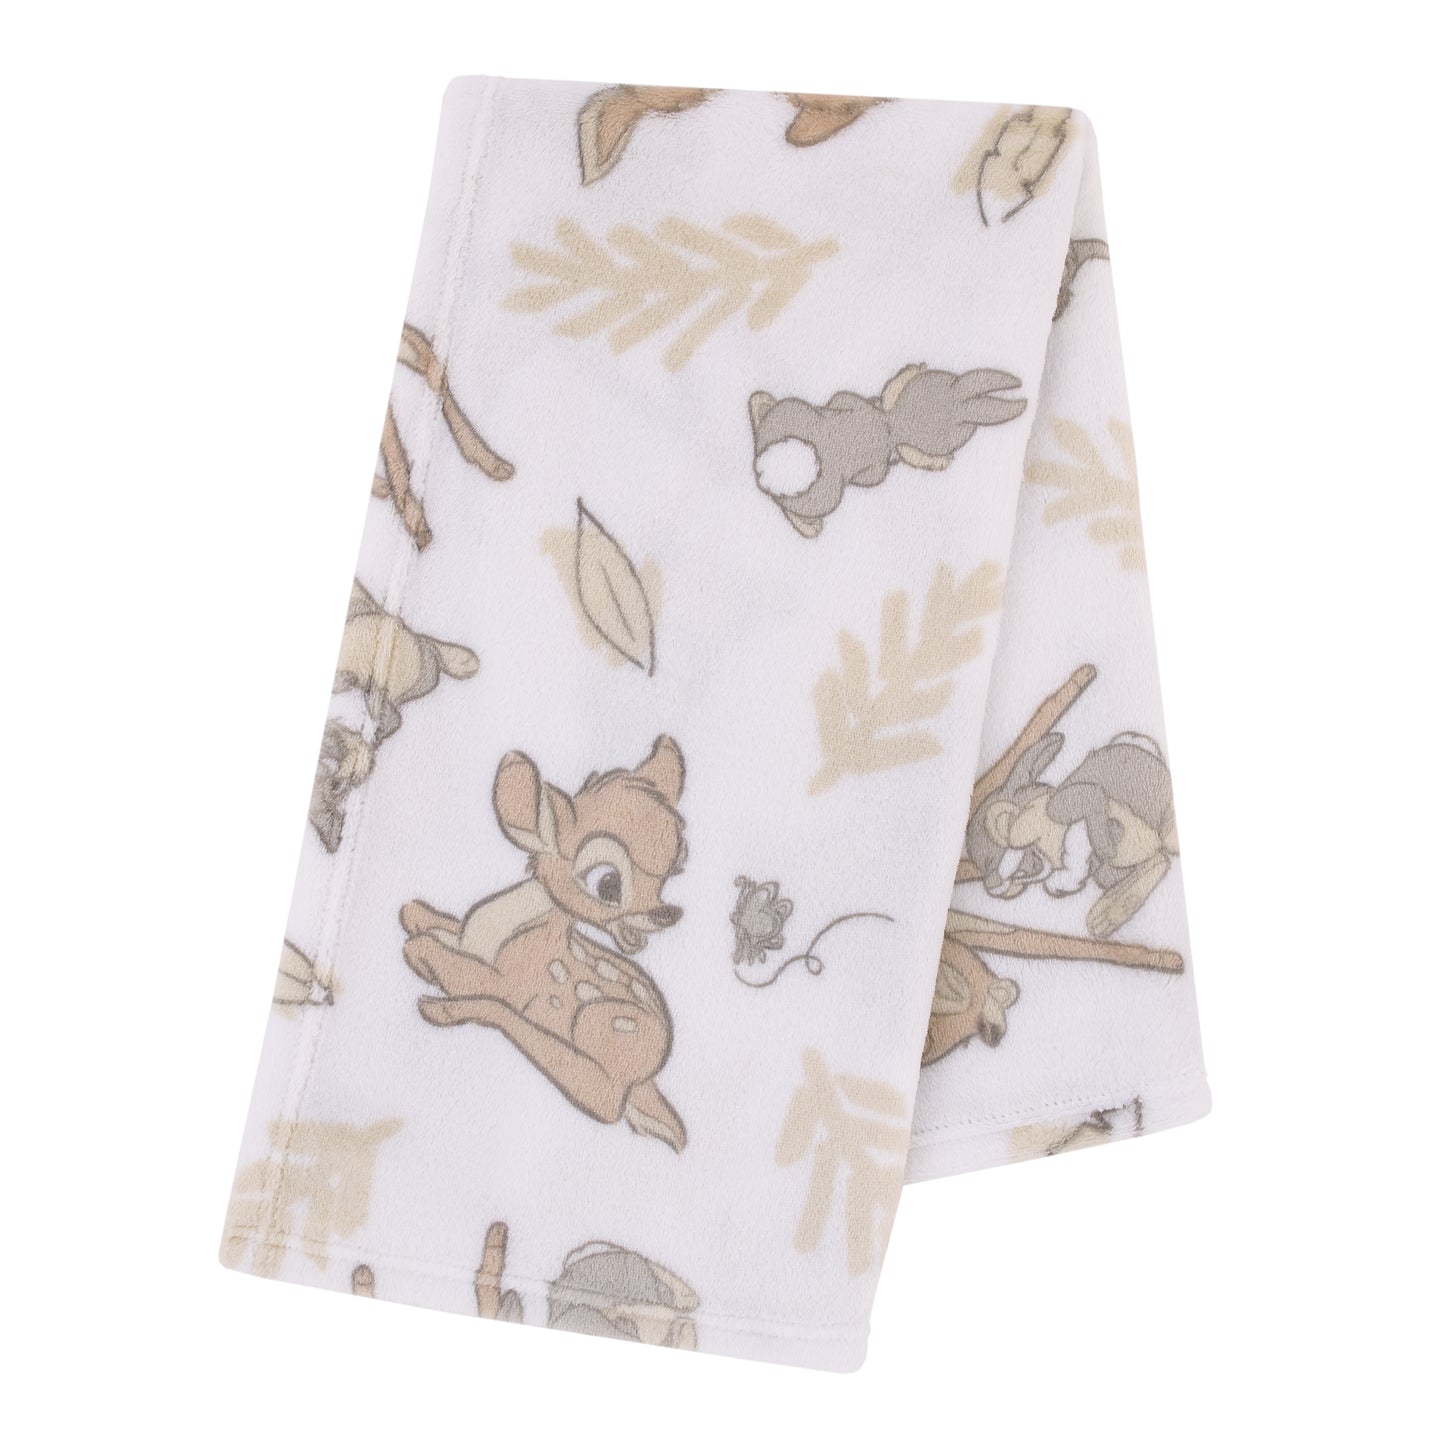 Disney B is for Bambi Tan, Gray, and White Super Soft Plush Baby Blanket